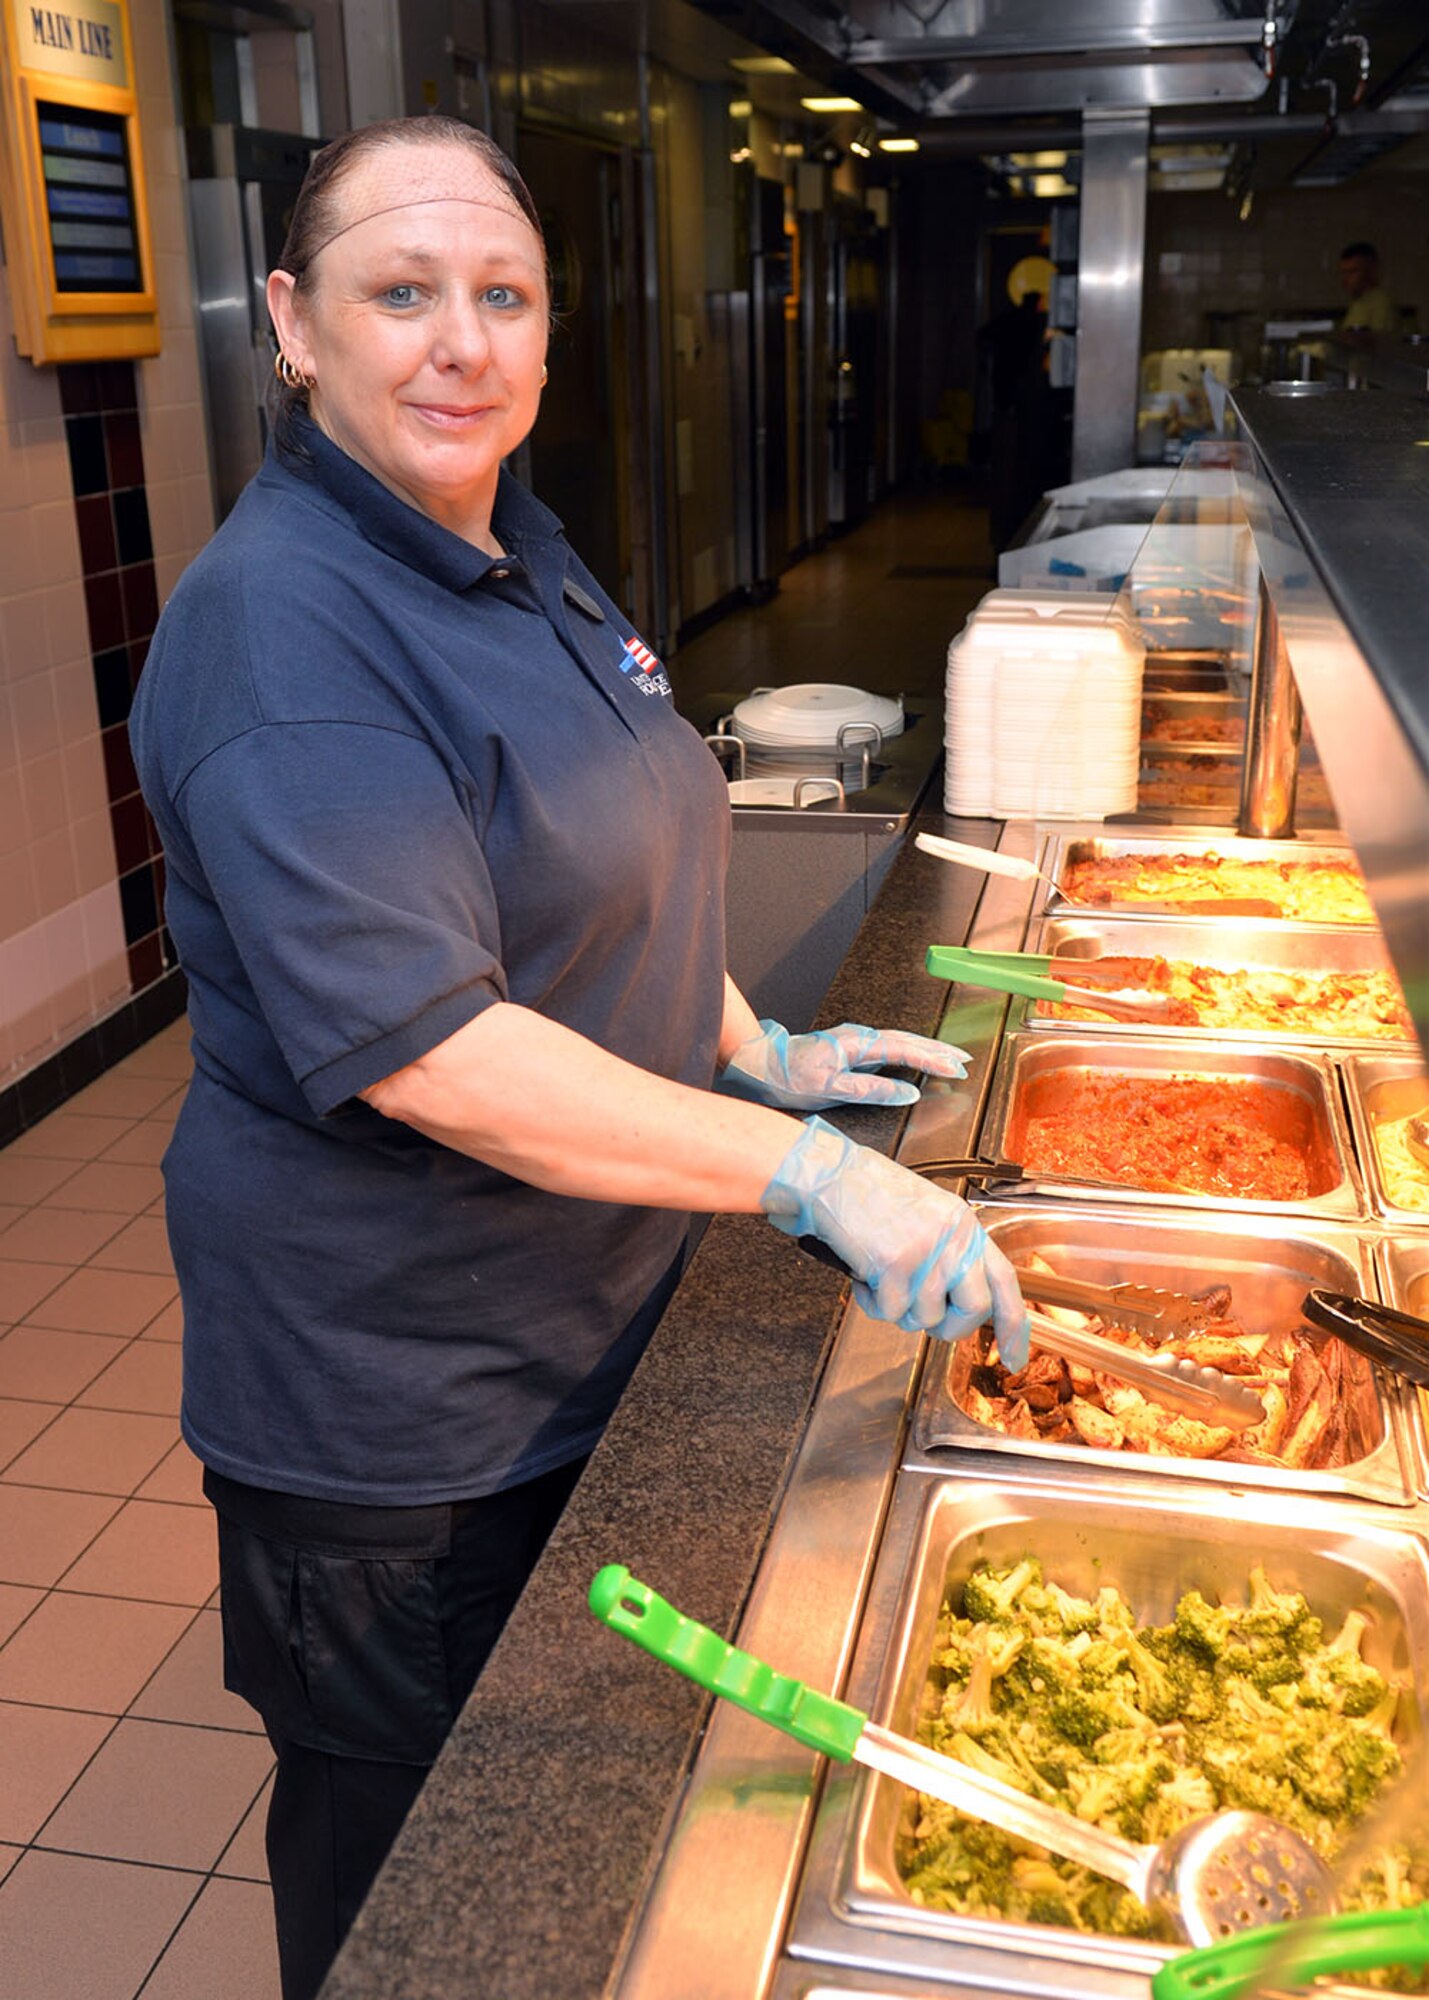 Linda Brady, 100th Force Support Squadron food service worker, prepares to serve food to customers at the Gateway Dining Facility June 29, 2016, on RAF Mildenhall, England. Brady was selected for the Square D Spotlight for exhibiting the Air Force Core Value, Service Before Self. (U.S. Air Force photo by Karen Abeyasekere/Released)